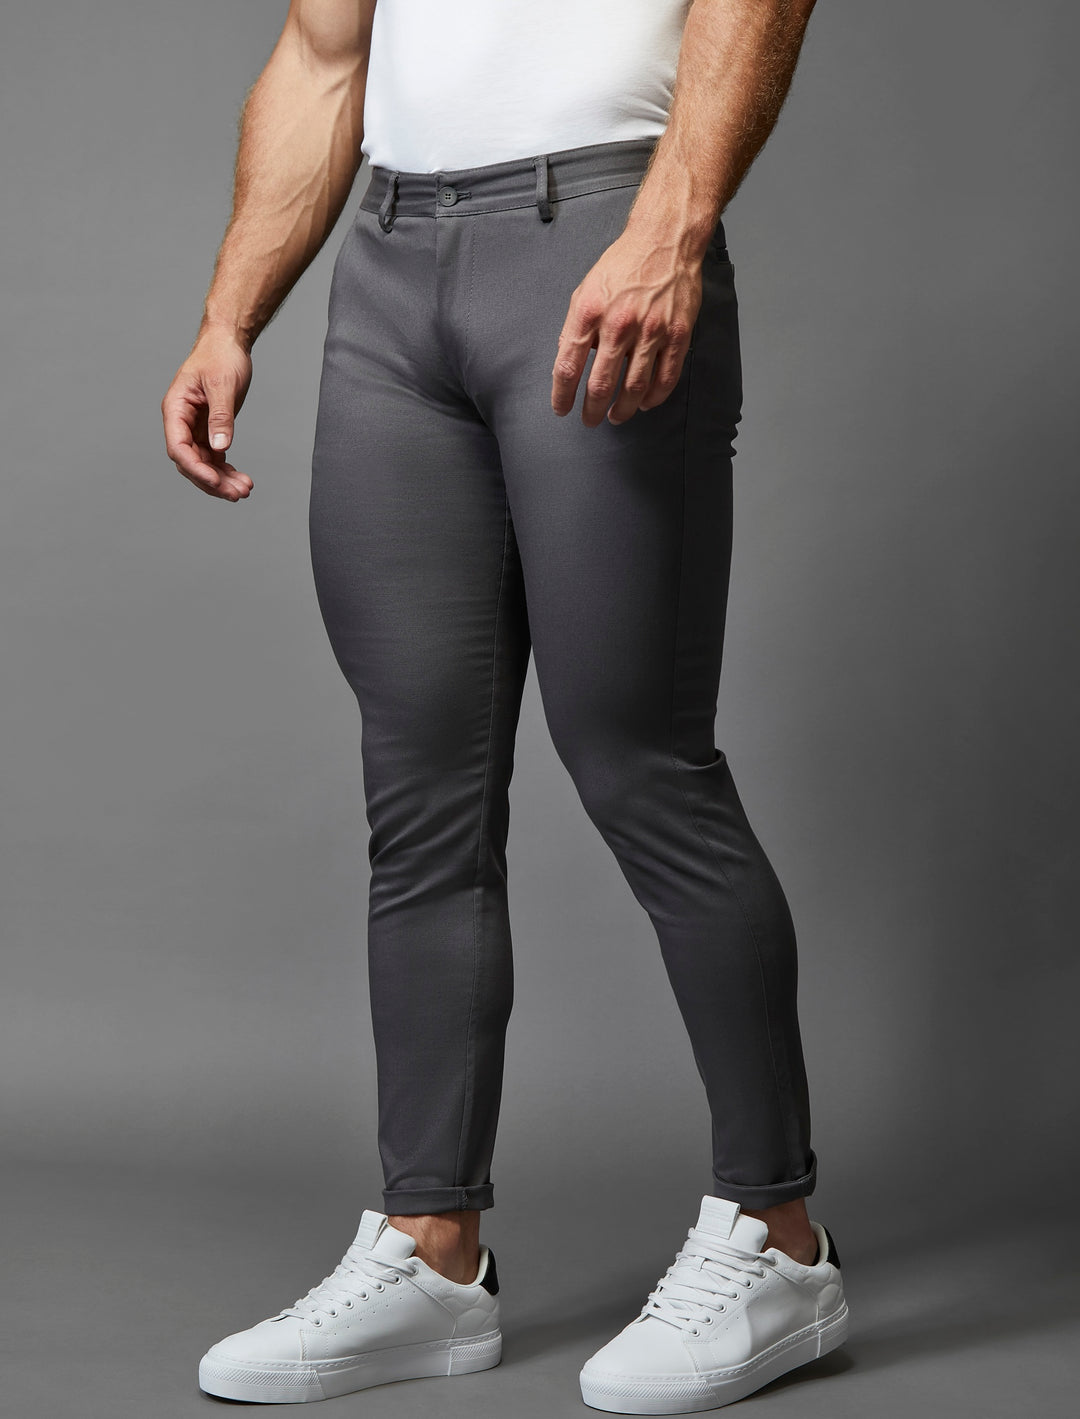 Grey athletic fit chinos by Tapered Menswear, enhanced with stretch for a contoured fit.